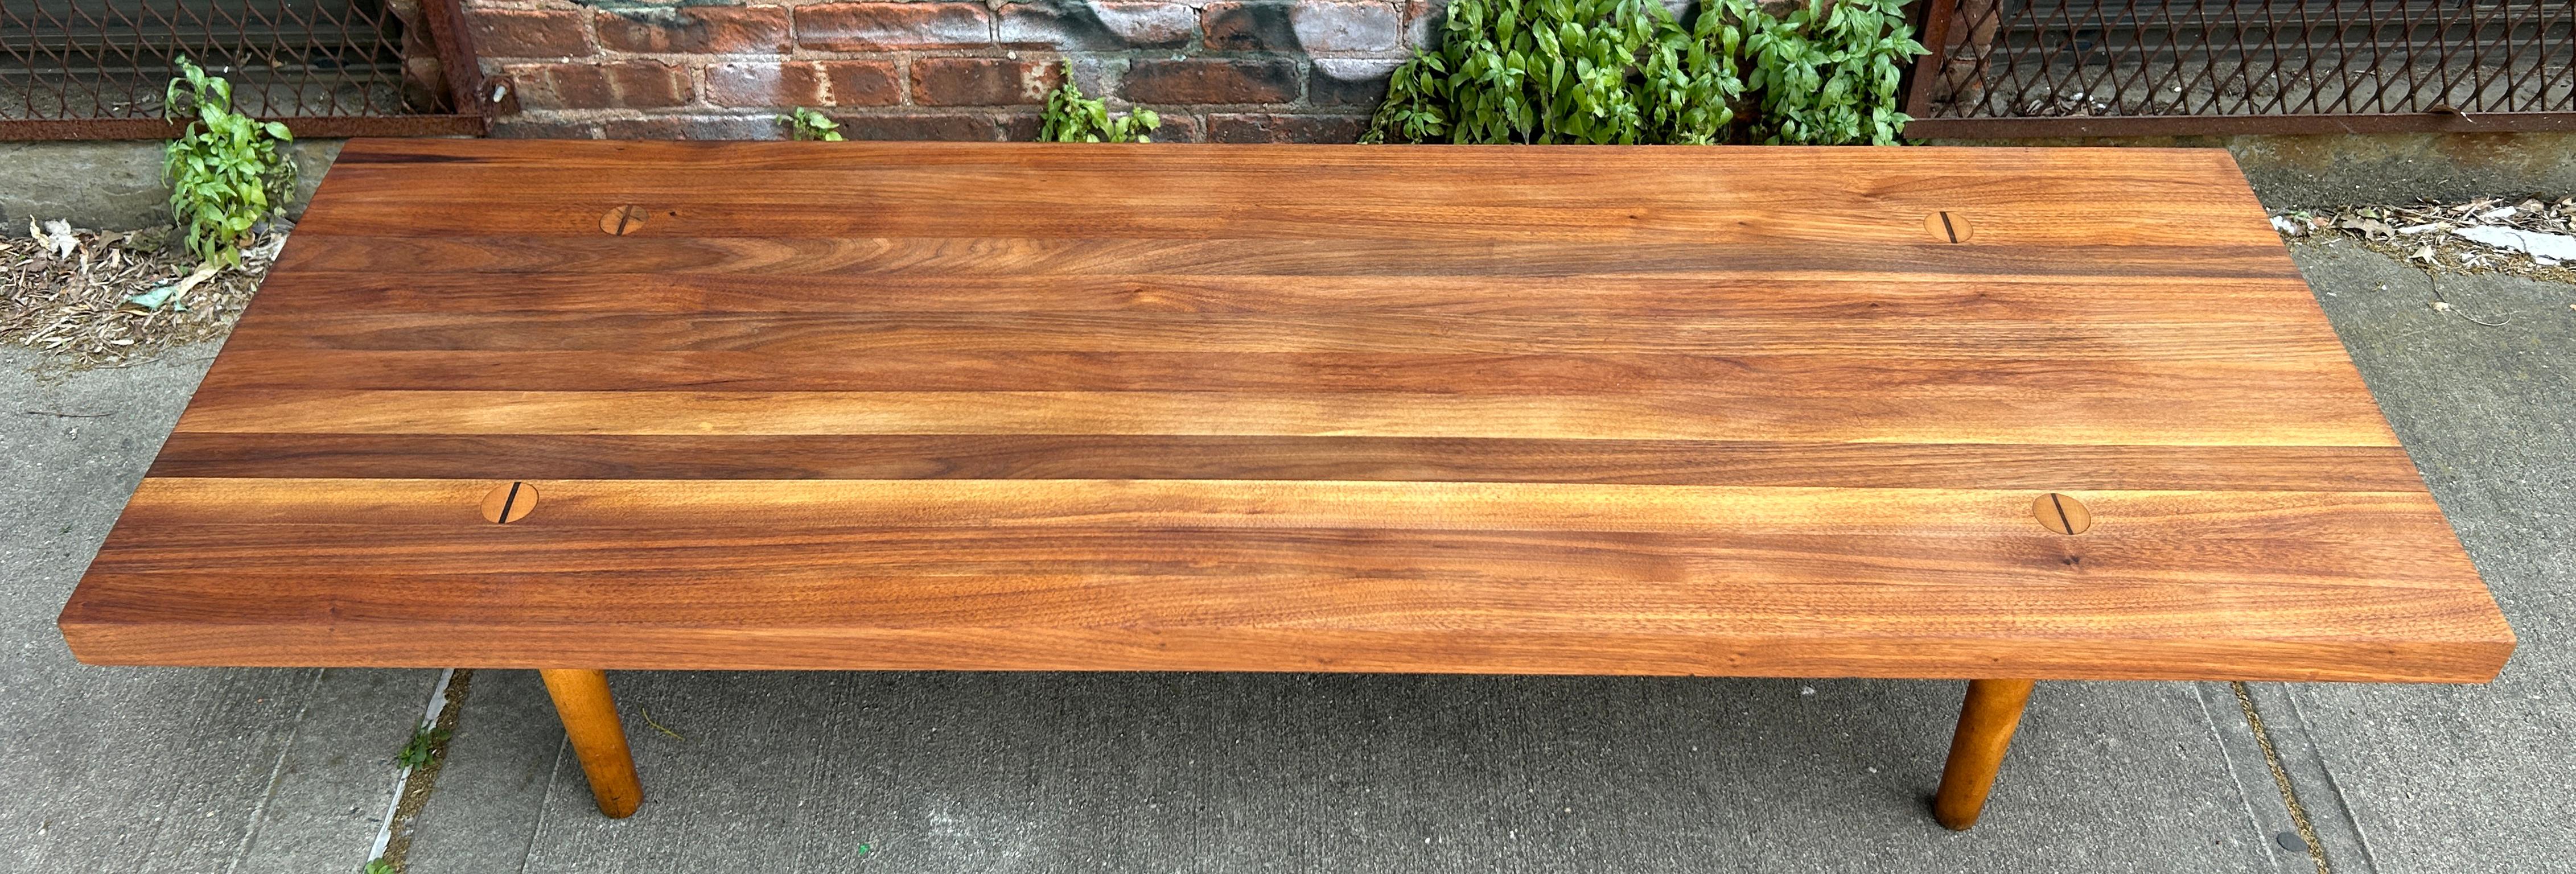 Mid-Century Modern Midcentury American Studio Craft Walnut Bench or Coffee Table Phillip Powell For Sale